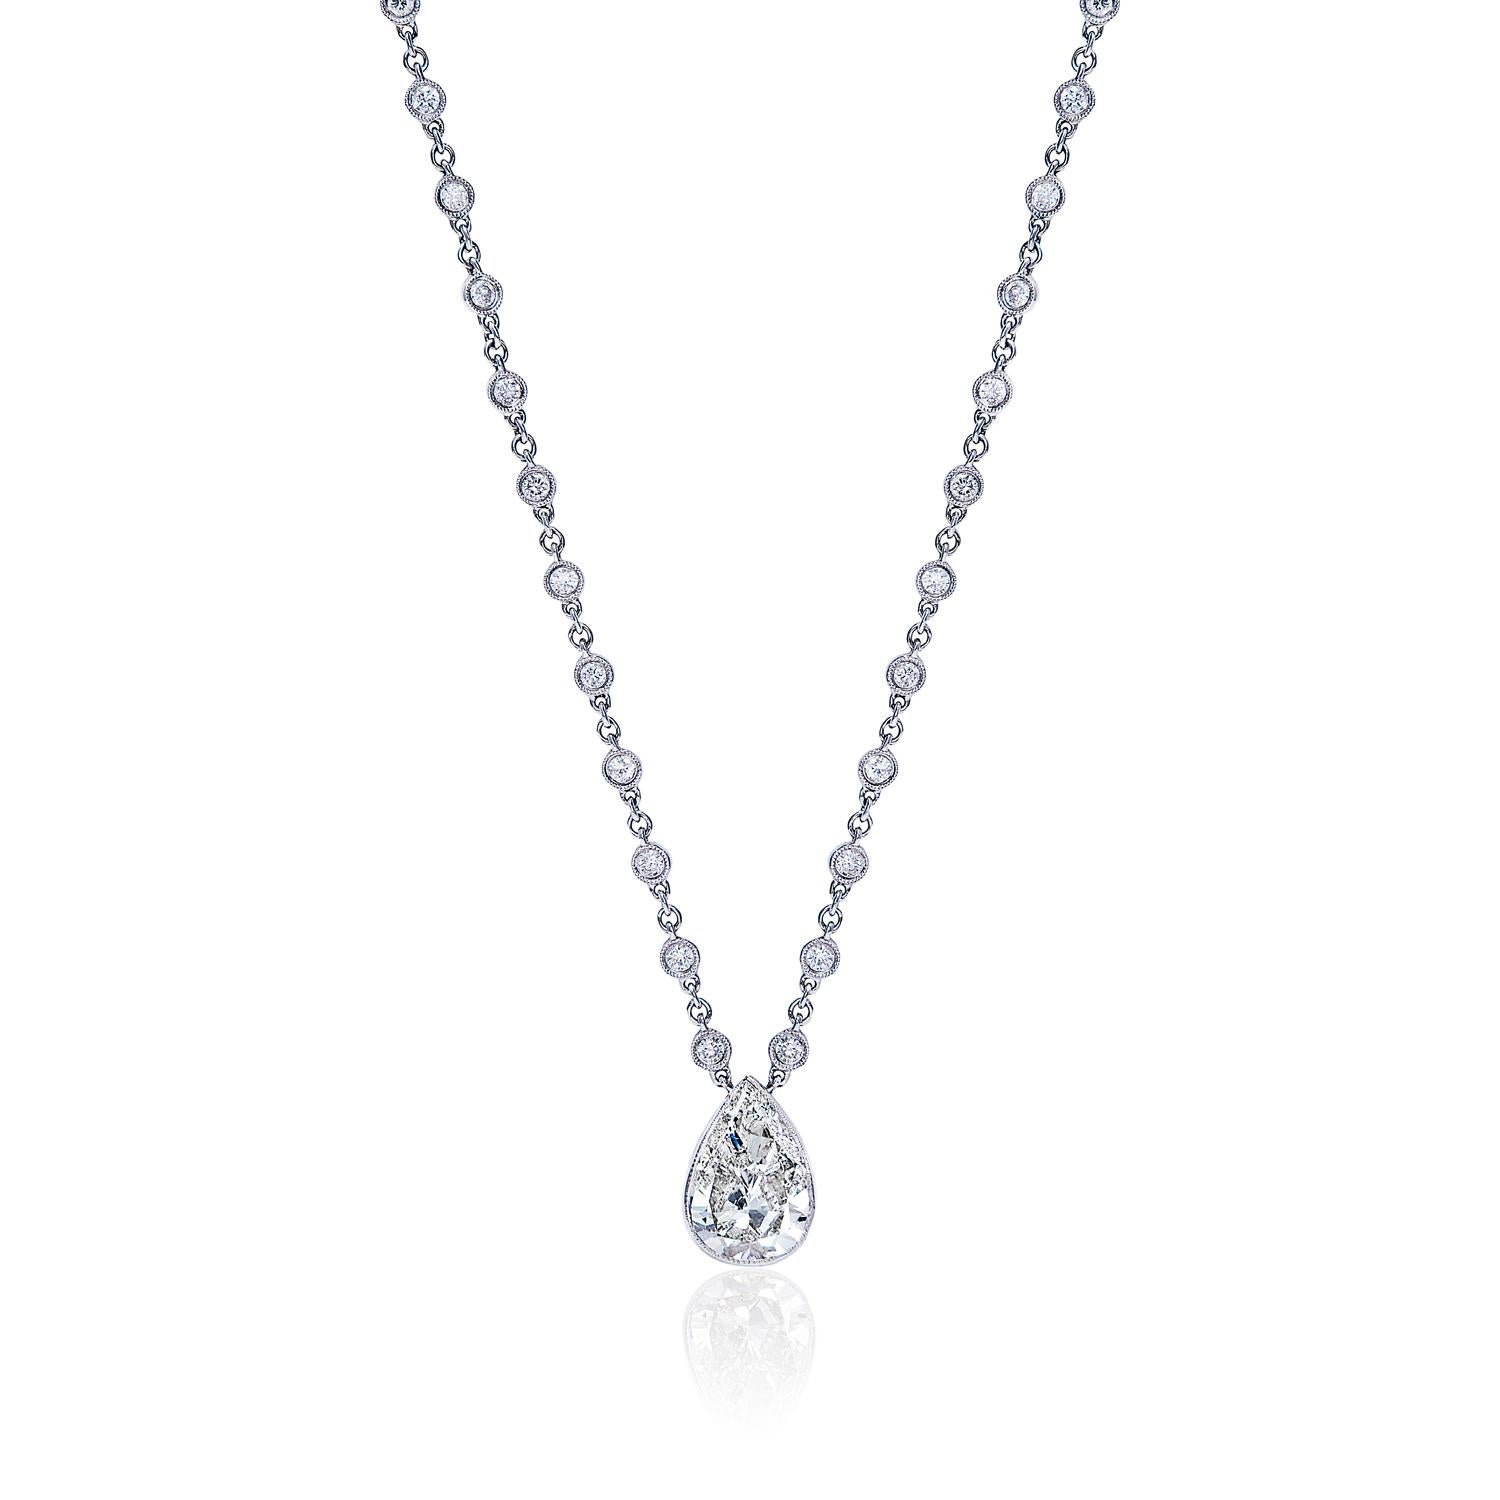 Looking for a gorgeous diamond necklace that will make her light up with joy? This stunning piece features a round brilliant cut diamond pendant suspended from a delicately crafted 18-karat white gold chain. The perfect gift for a special lady in